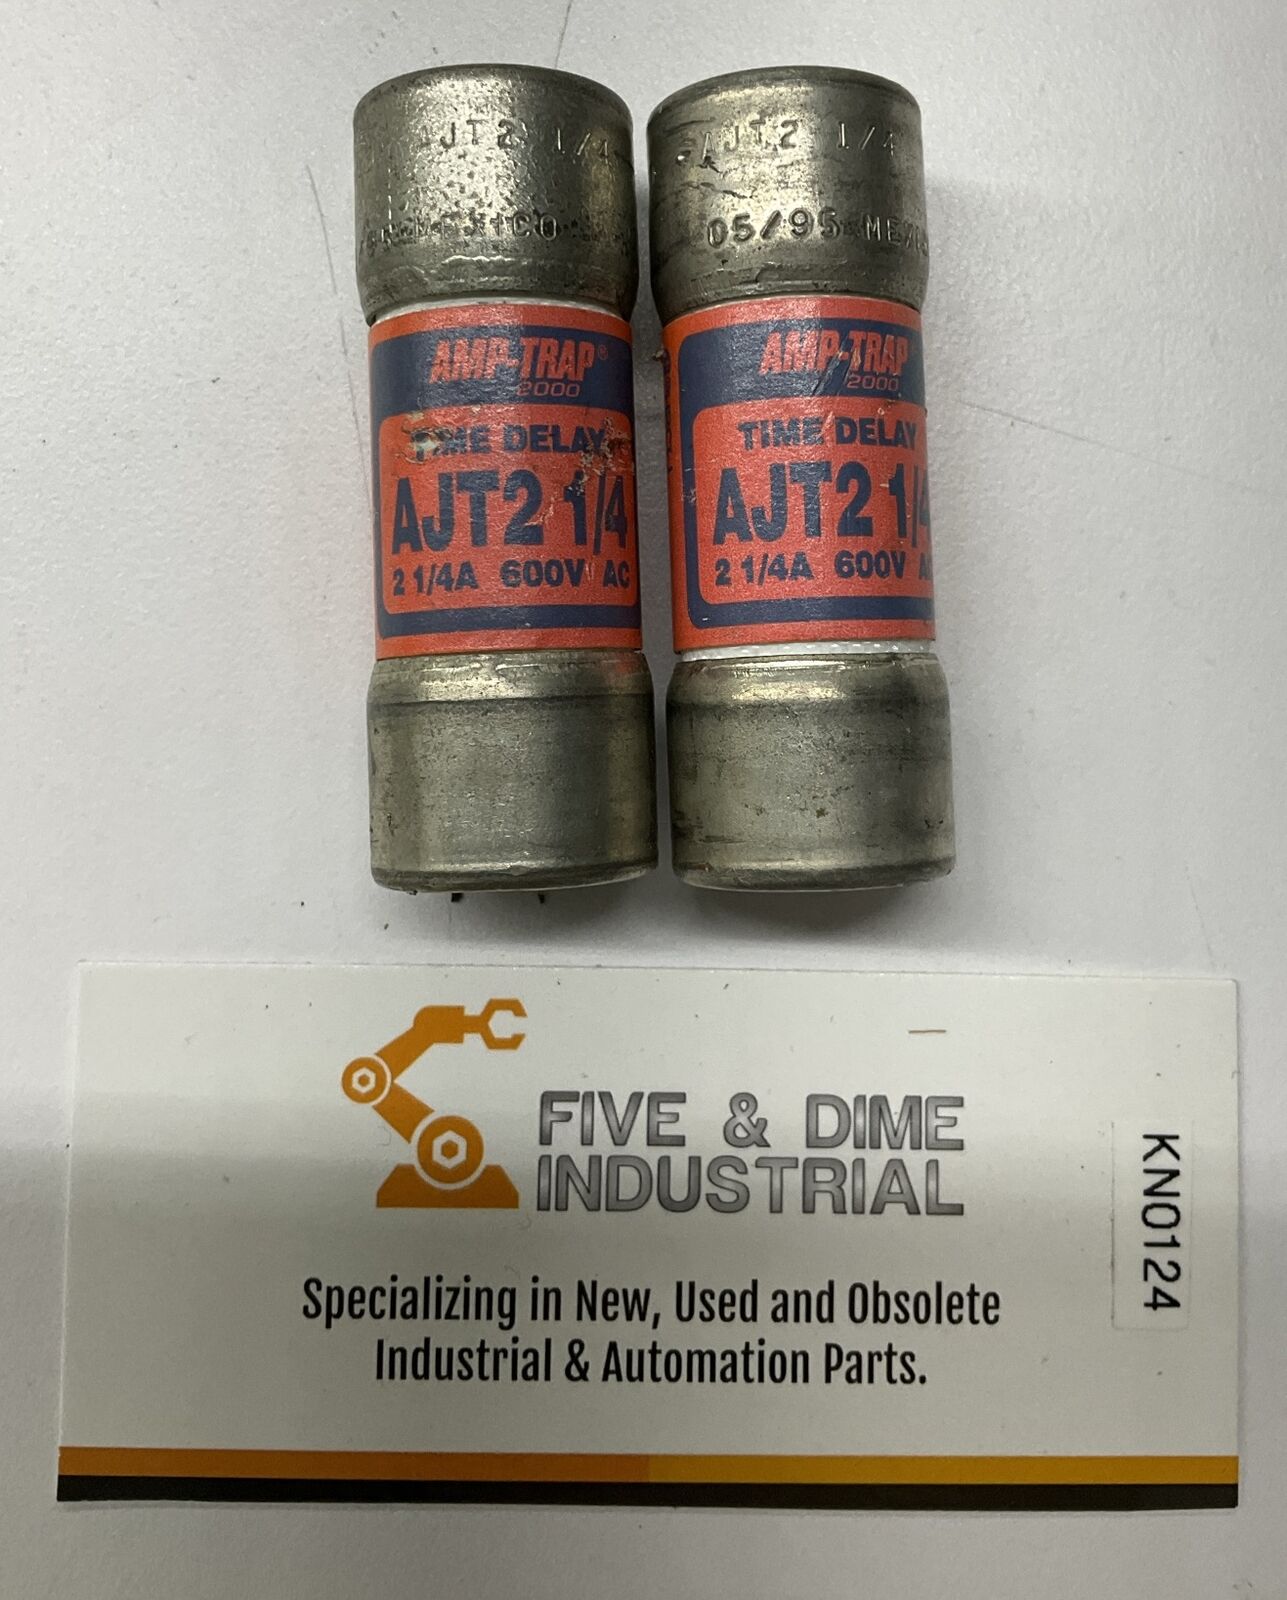 Mersen AMP-Trap AJT2-1/4 Lot of 2 Time Delay Fuses 2.25 Amp (YE268)